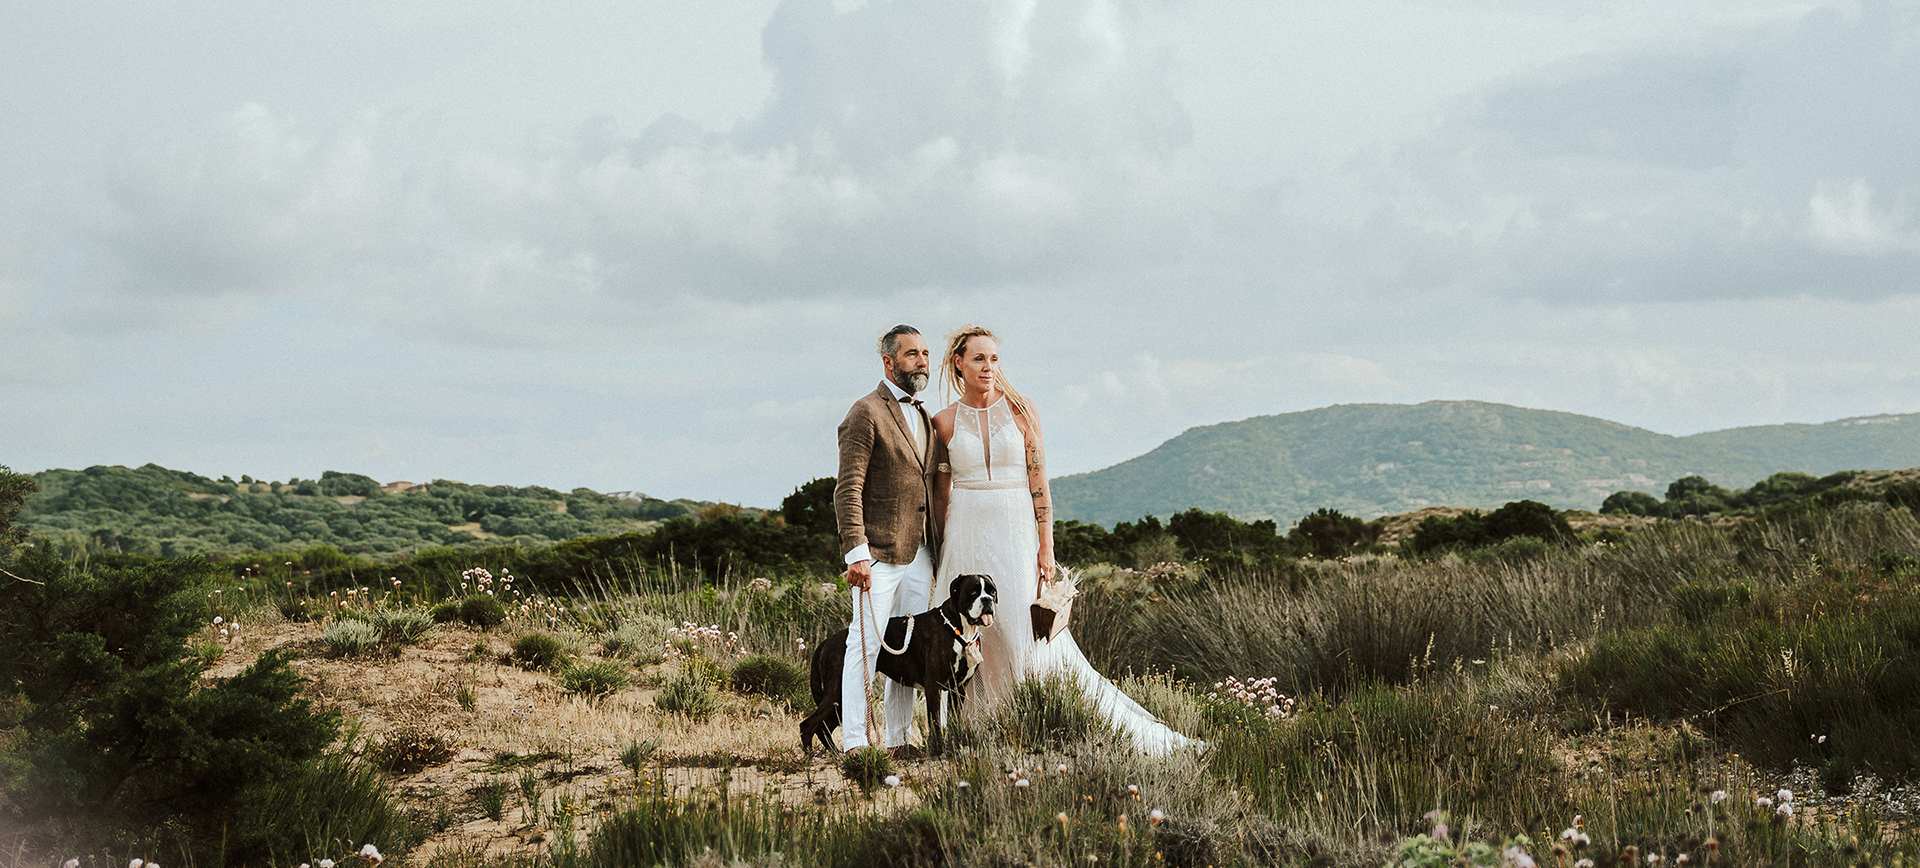 Meadows and Hills Elopement in Sardinia